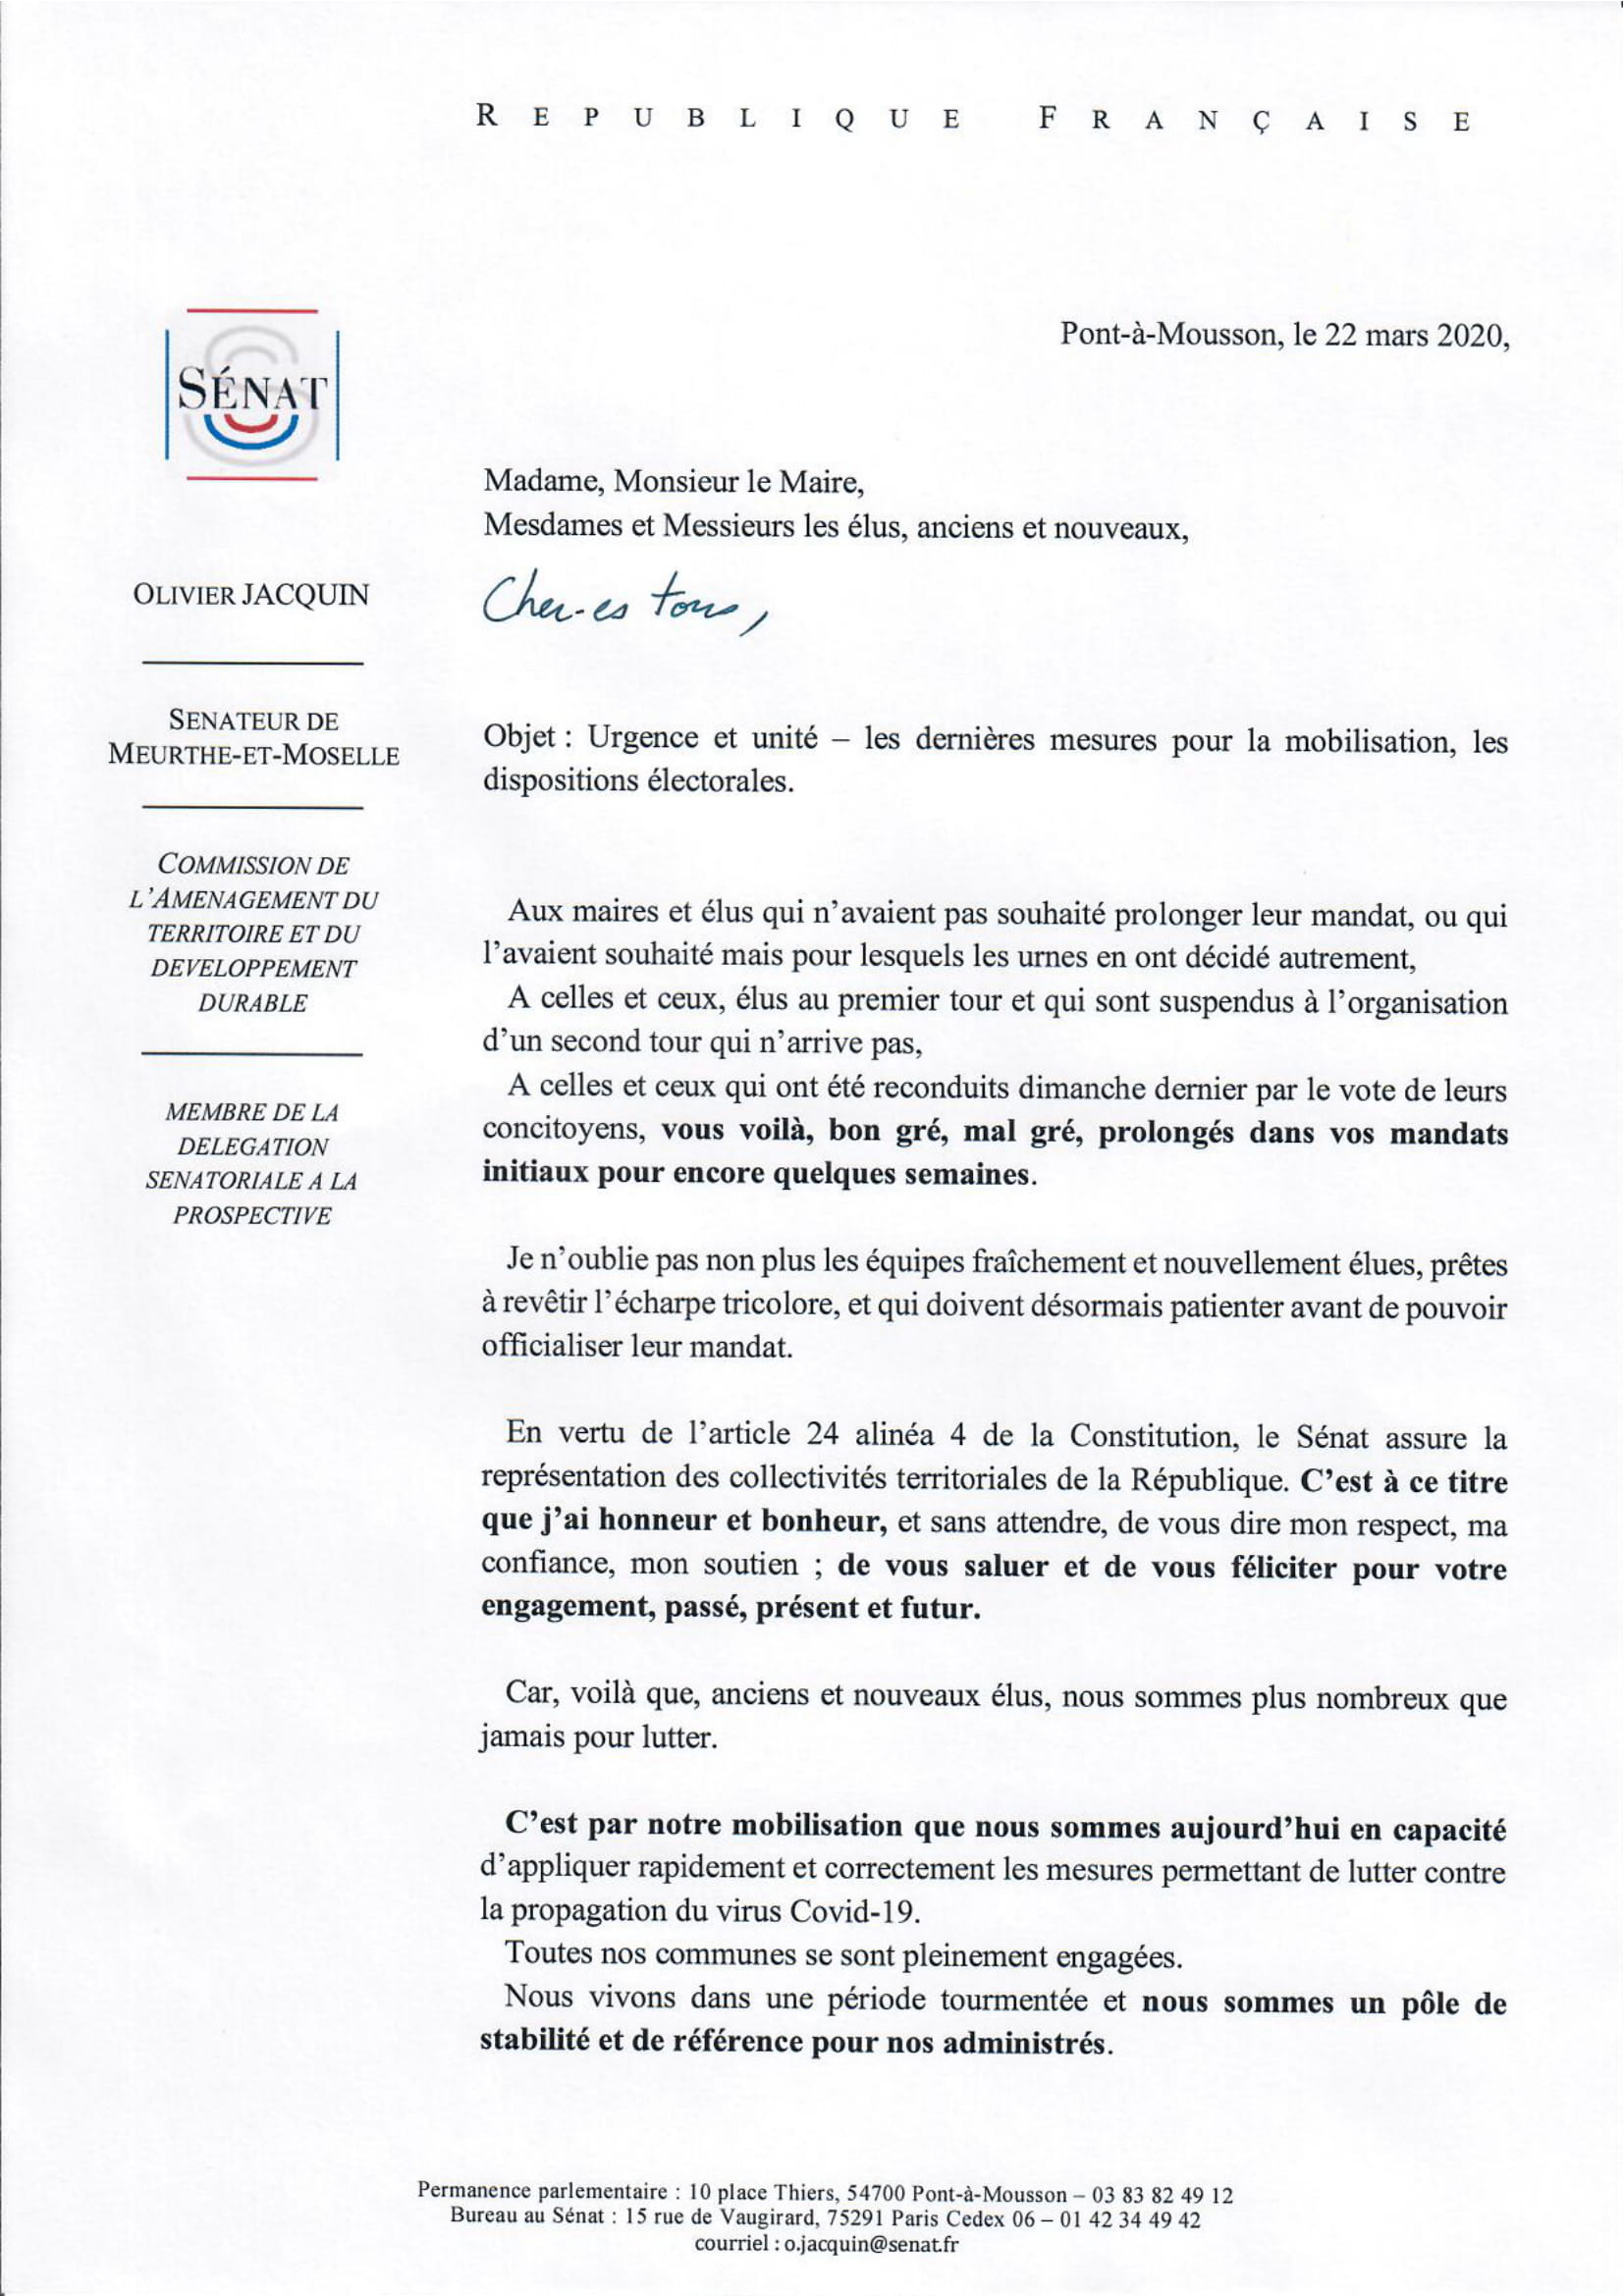 Courrier mobilisation général dispositions electorales page 1